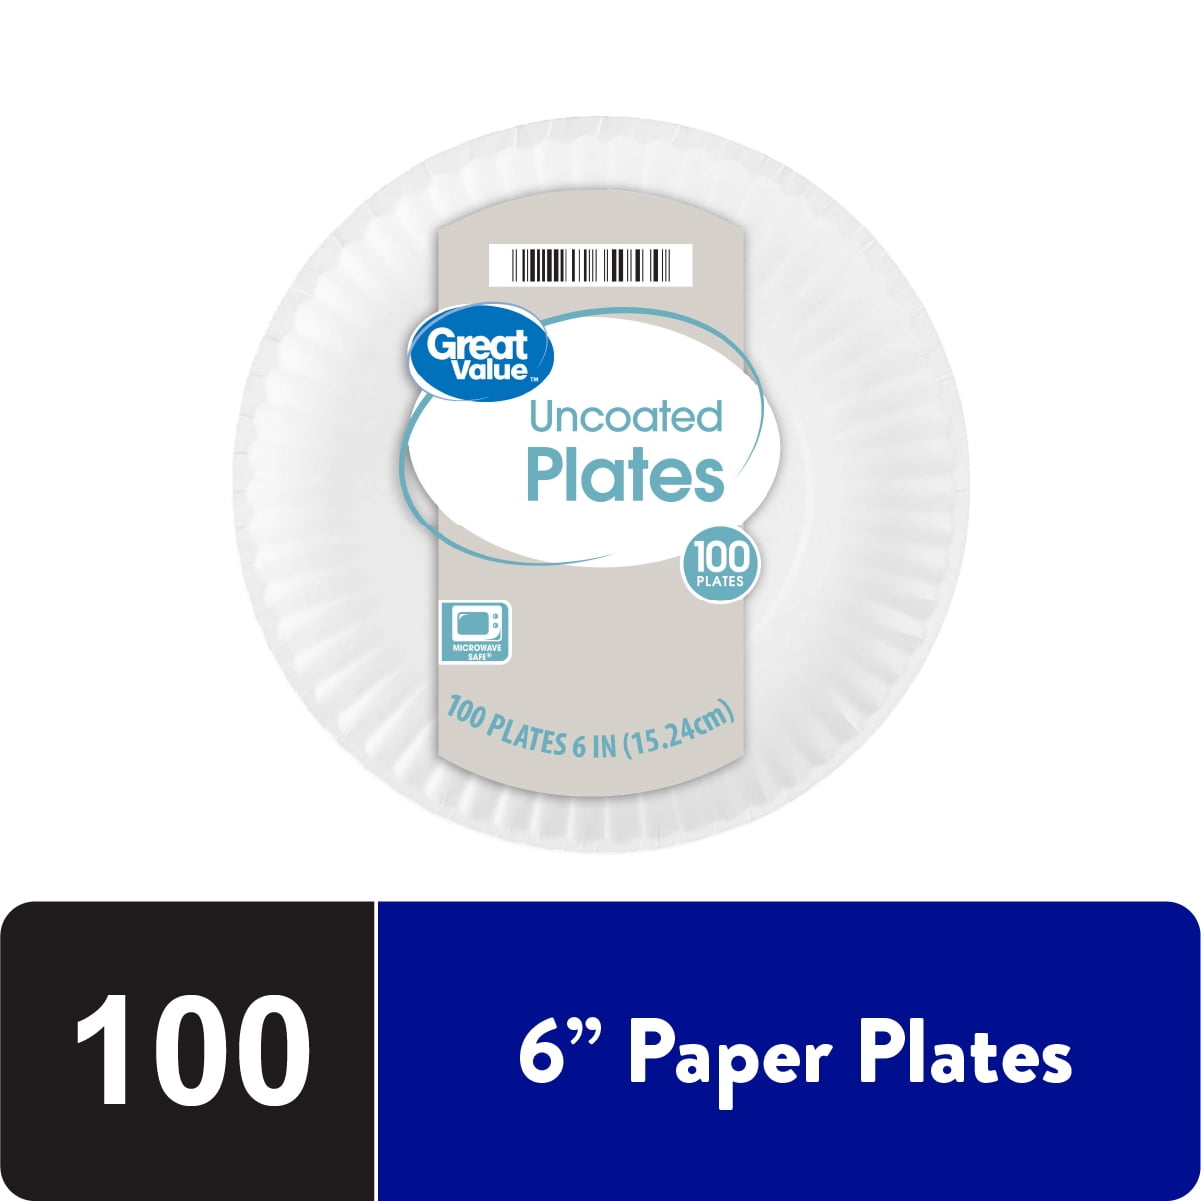 7 Perfect Stix Perfectware 7-50ct Wooden Disposable Rectangular Plates Pack of 50 